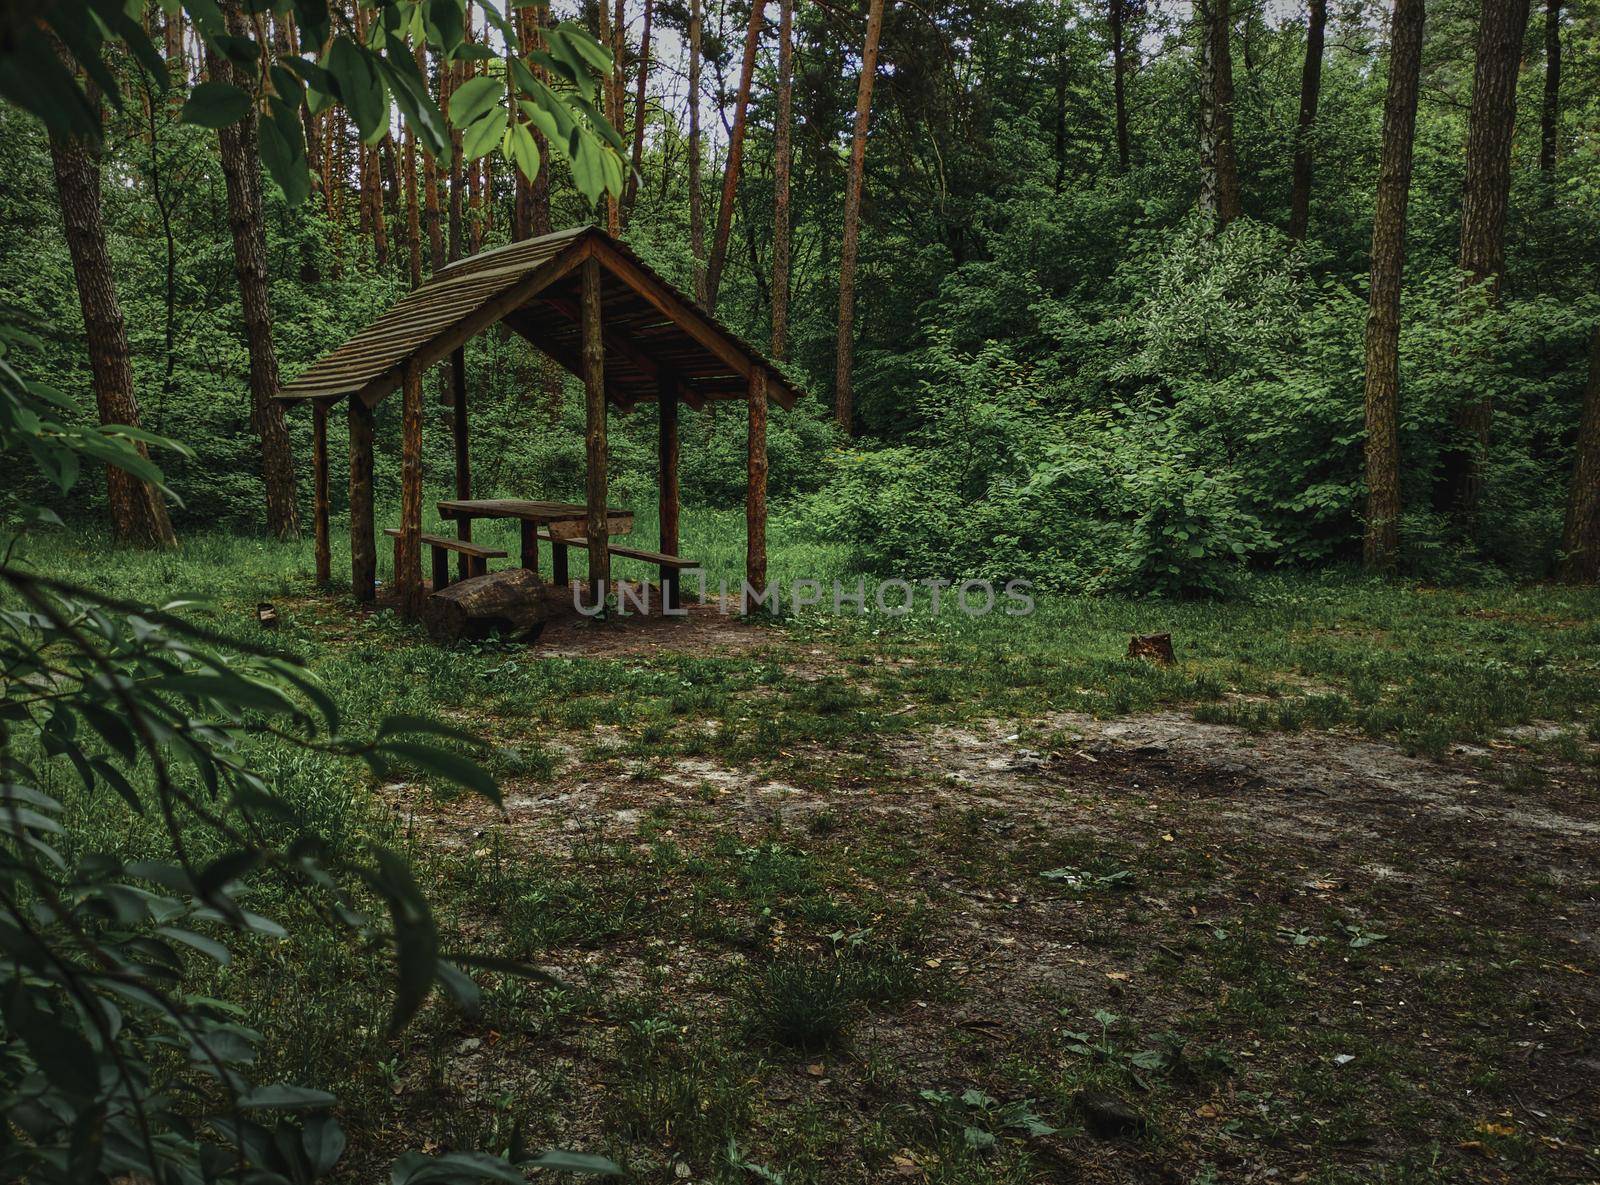 Covered seating area. A wooden gazebo for relaxing in the forest